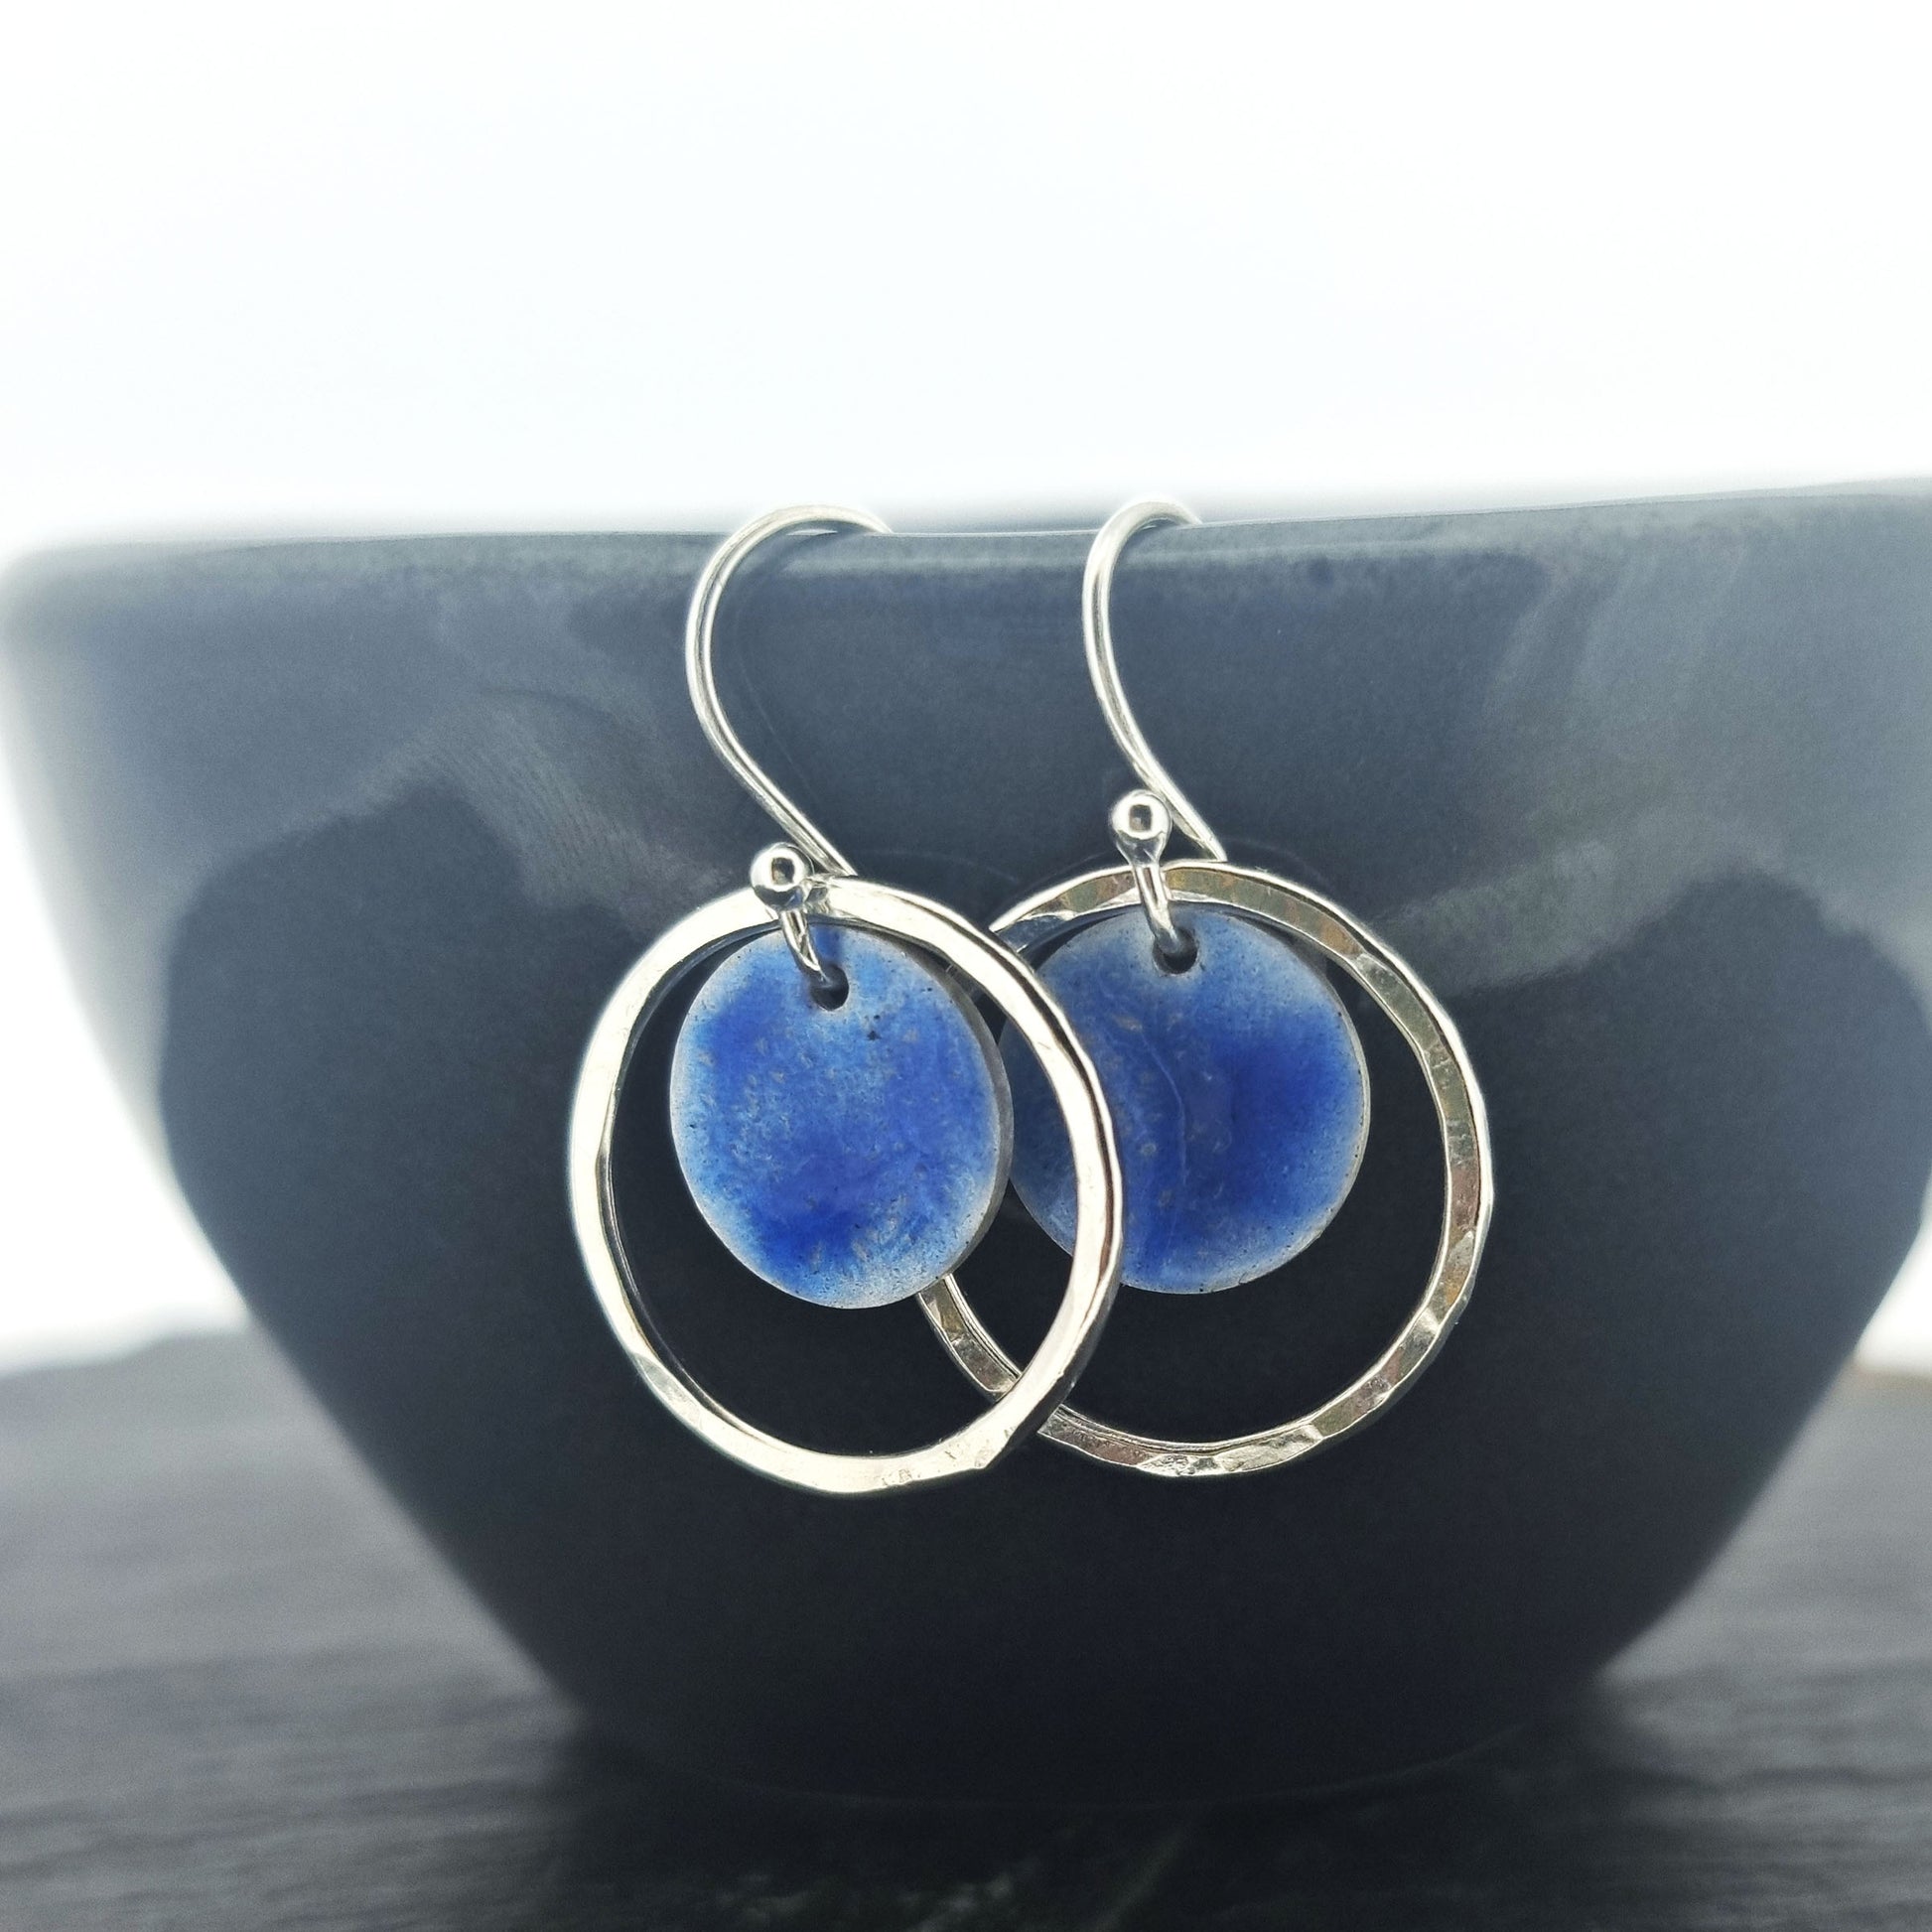 Silver drop earrings with a central disc featuring patterned dark blue enamel surrounded by a silver hammered open circle. Pictured on a dark bowl.